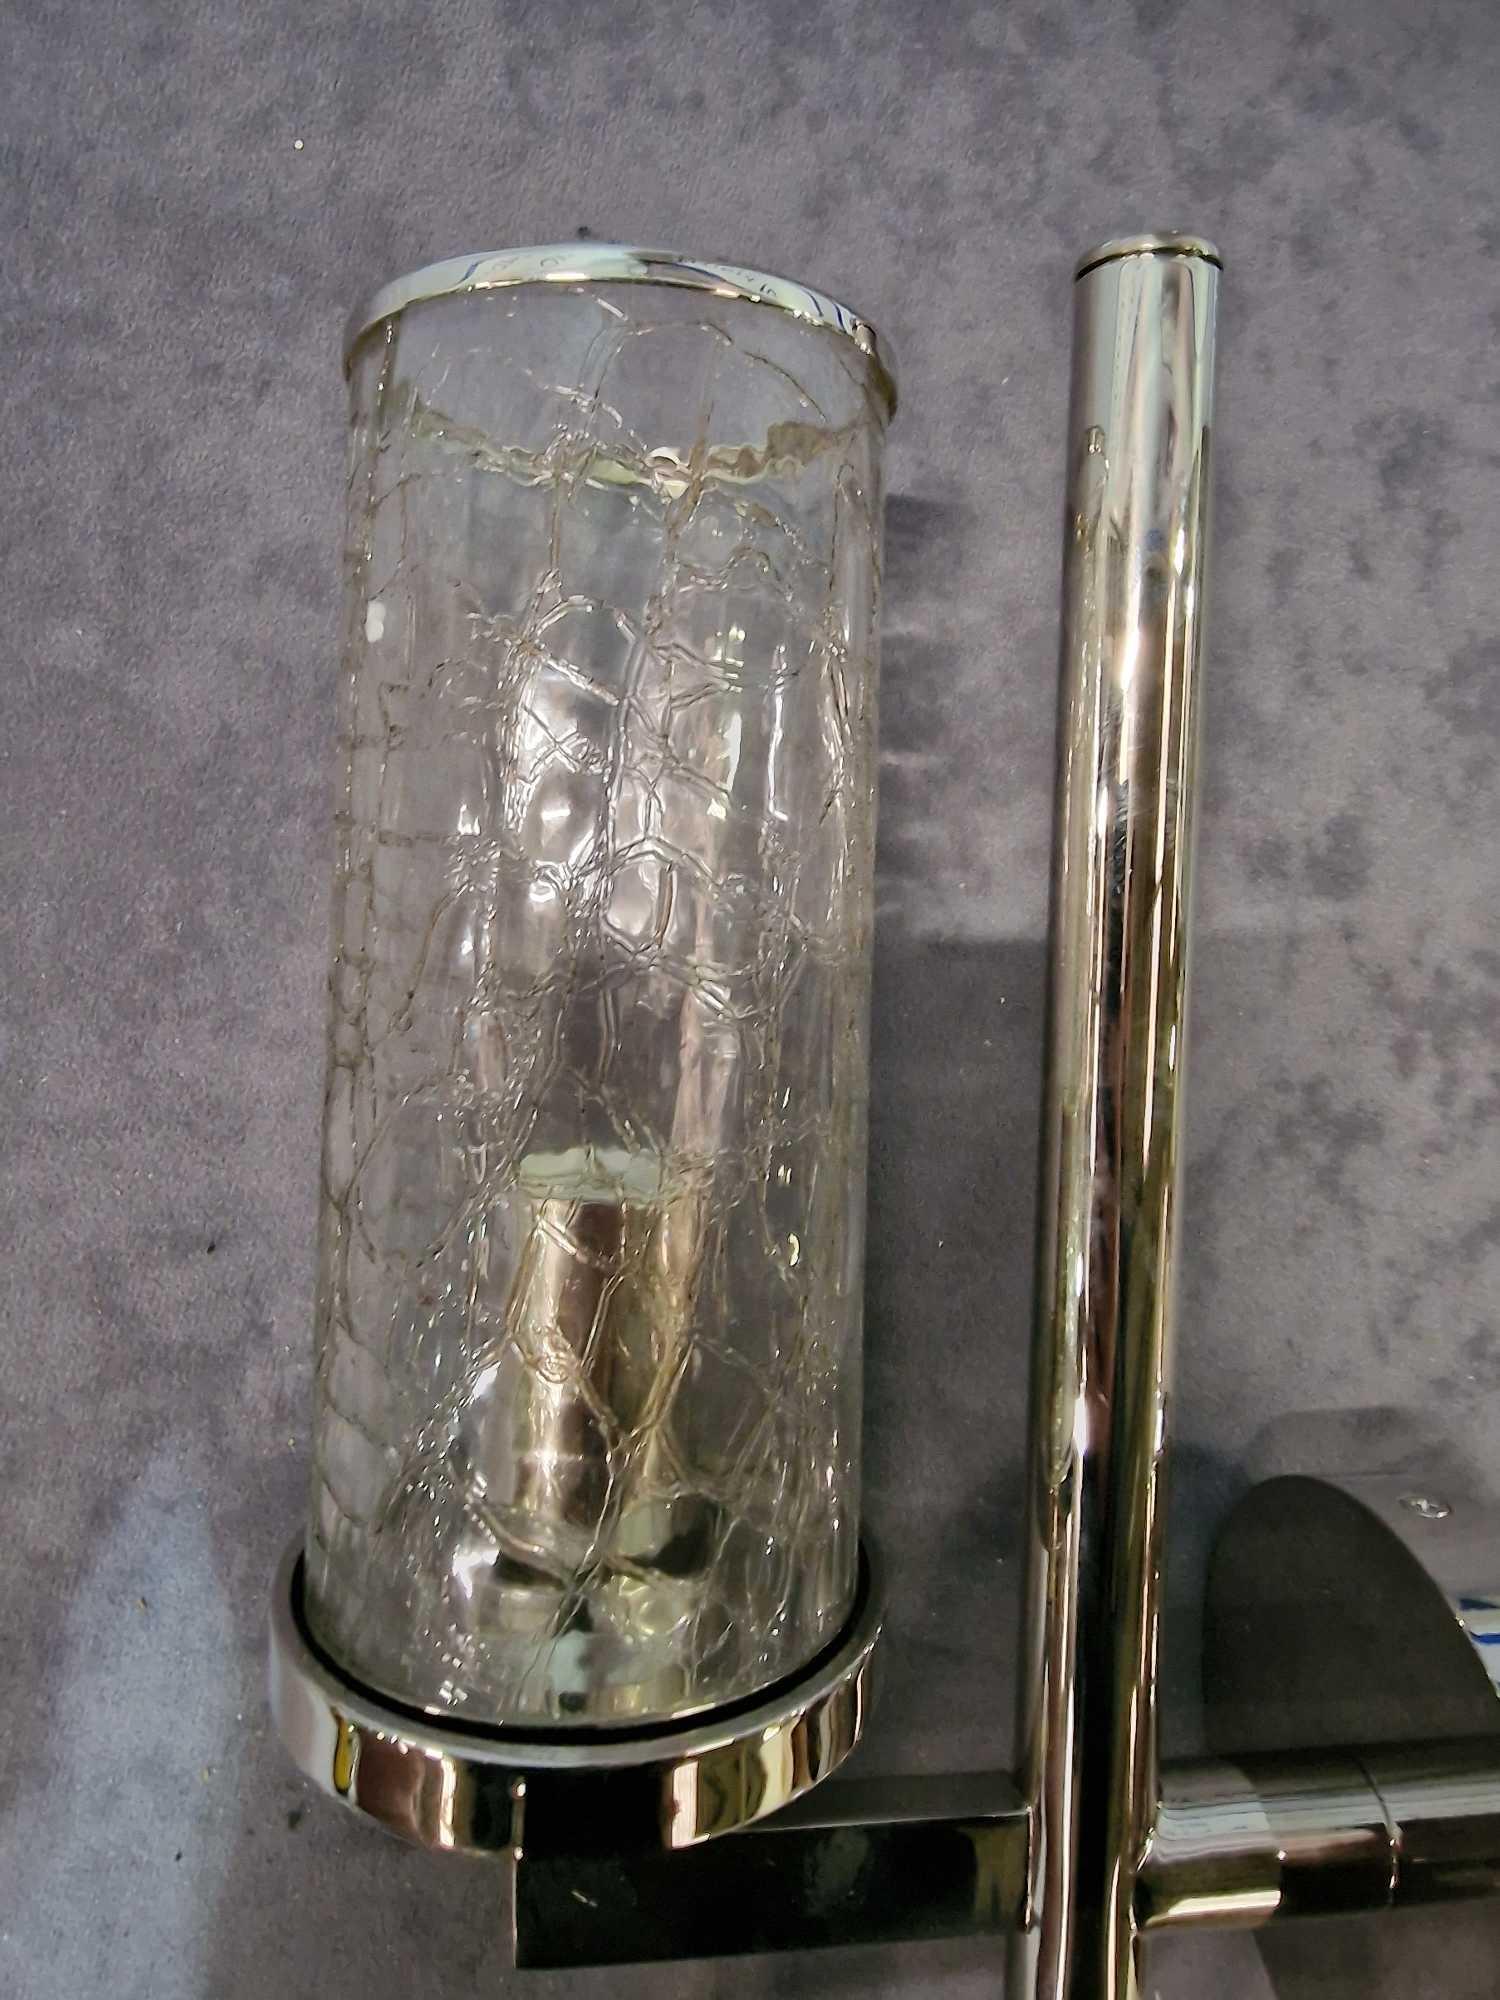 Kelly Wearstler For Visual Comfort Liaison Single Sconce In Polished Nickel With Crackle Glass - Image 2 of 2